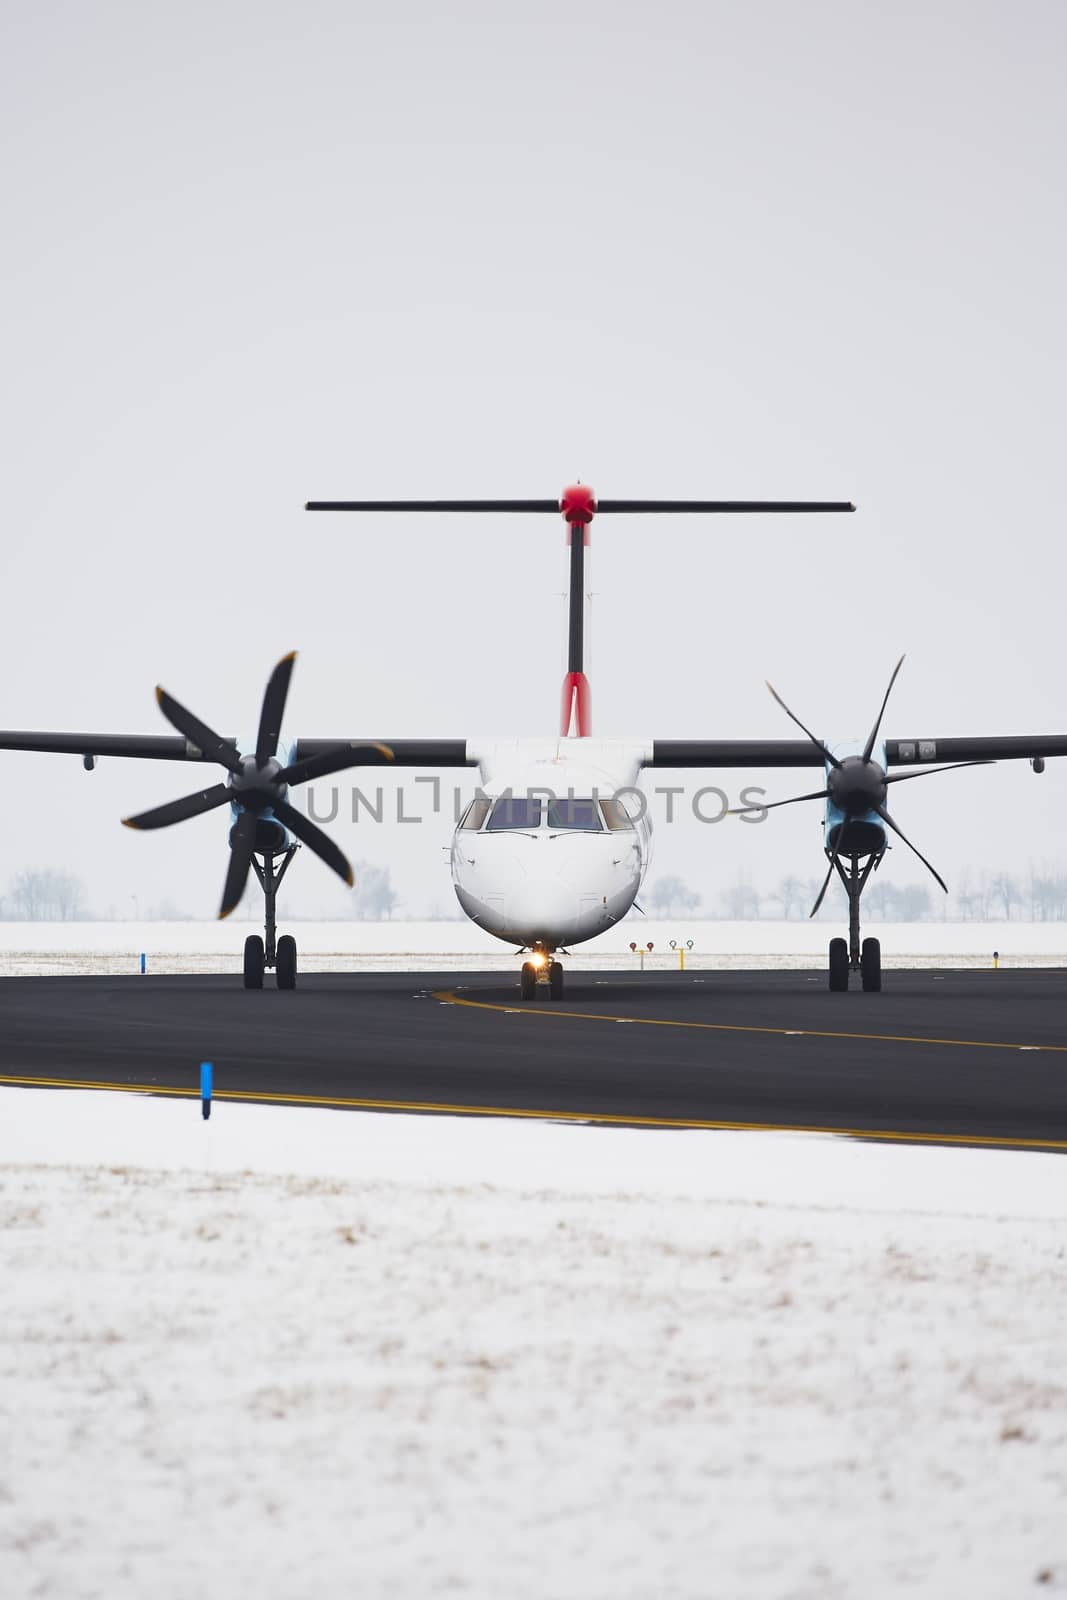 Airplane is taxiing on the airport in winter.